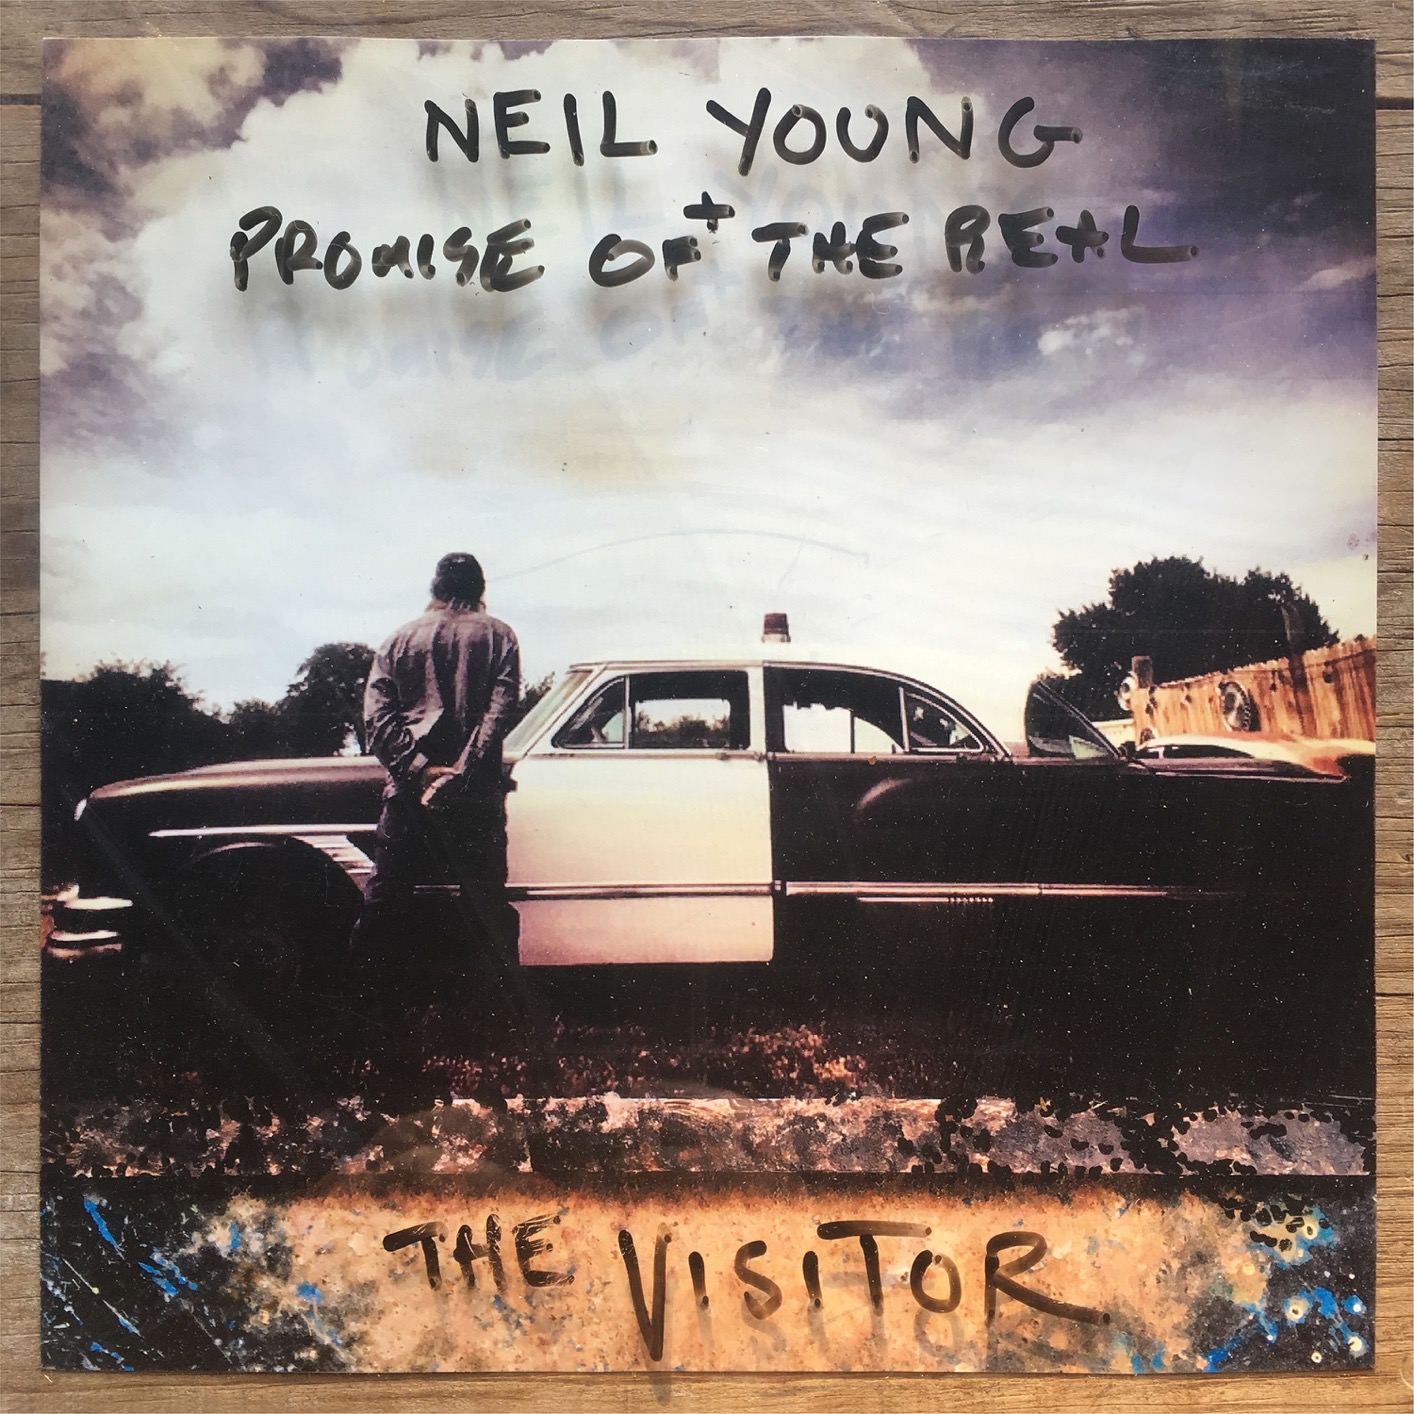 Neil Young & Promise Of The Real - The Visitor (2017) [Qobuz FLAC 24bit/96kHz]